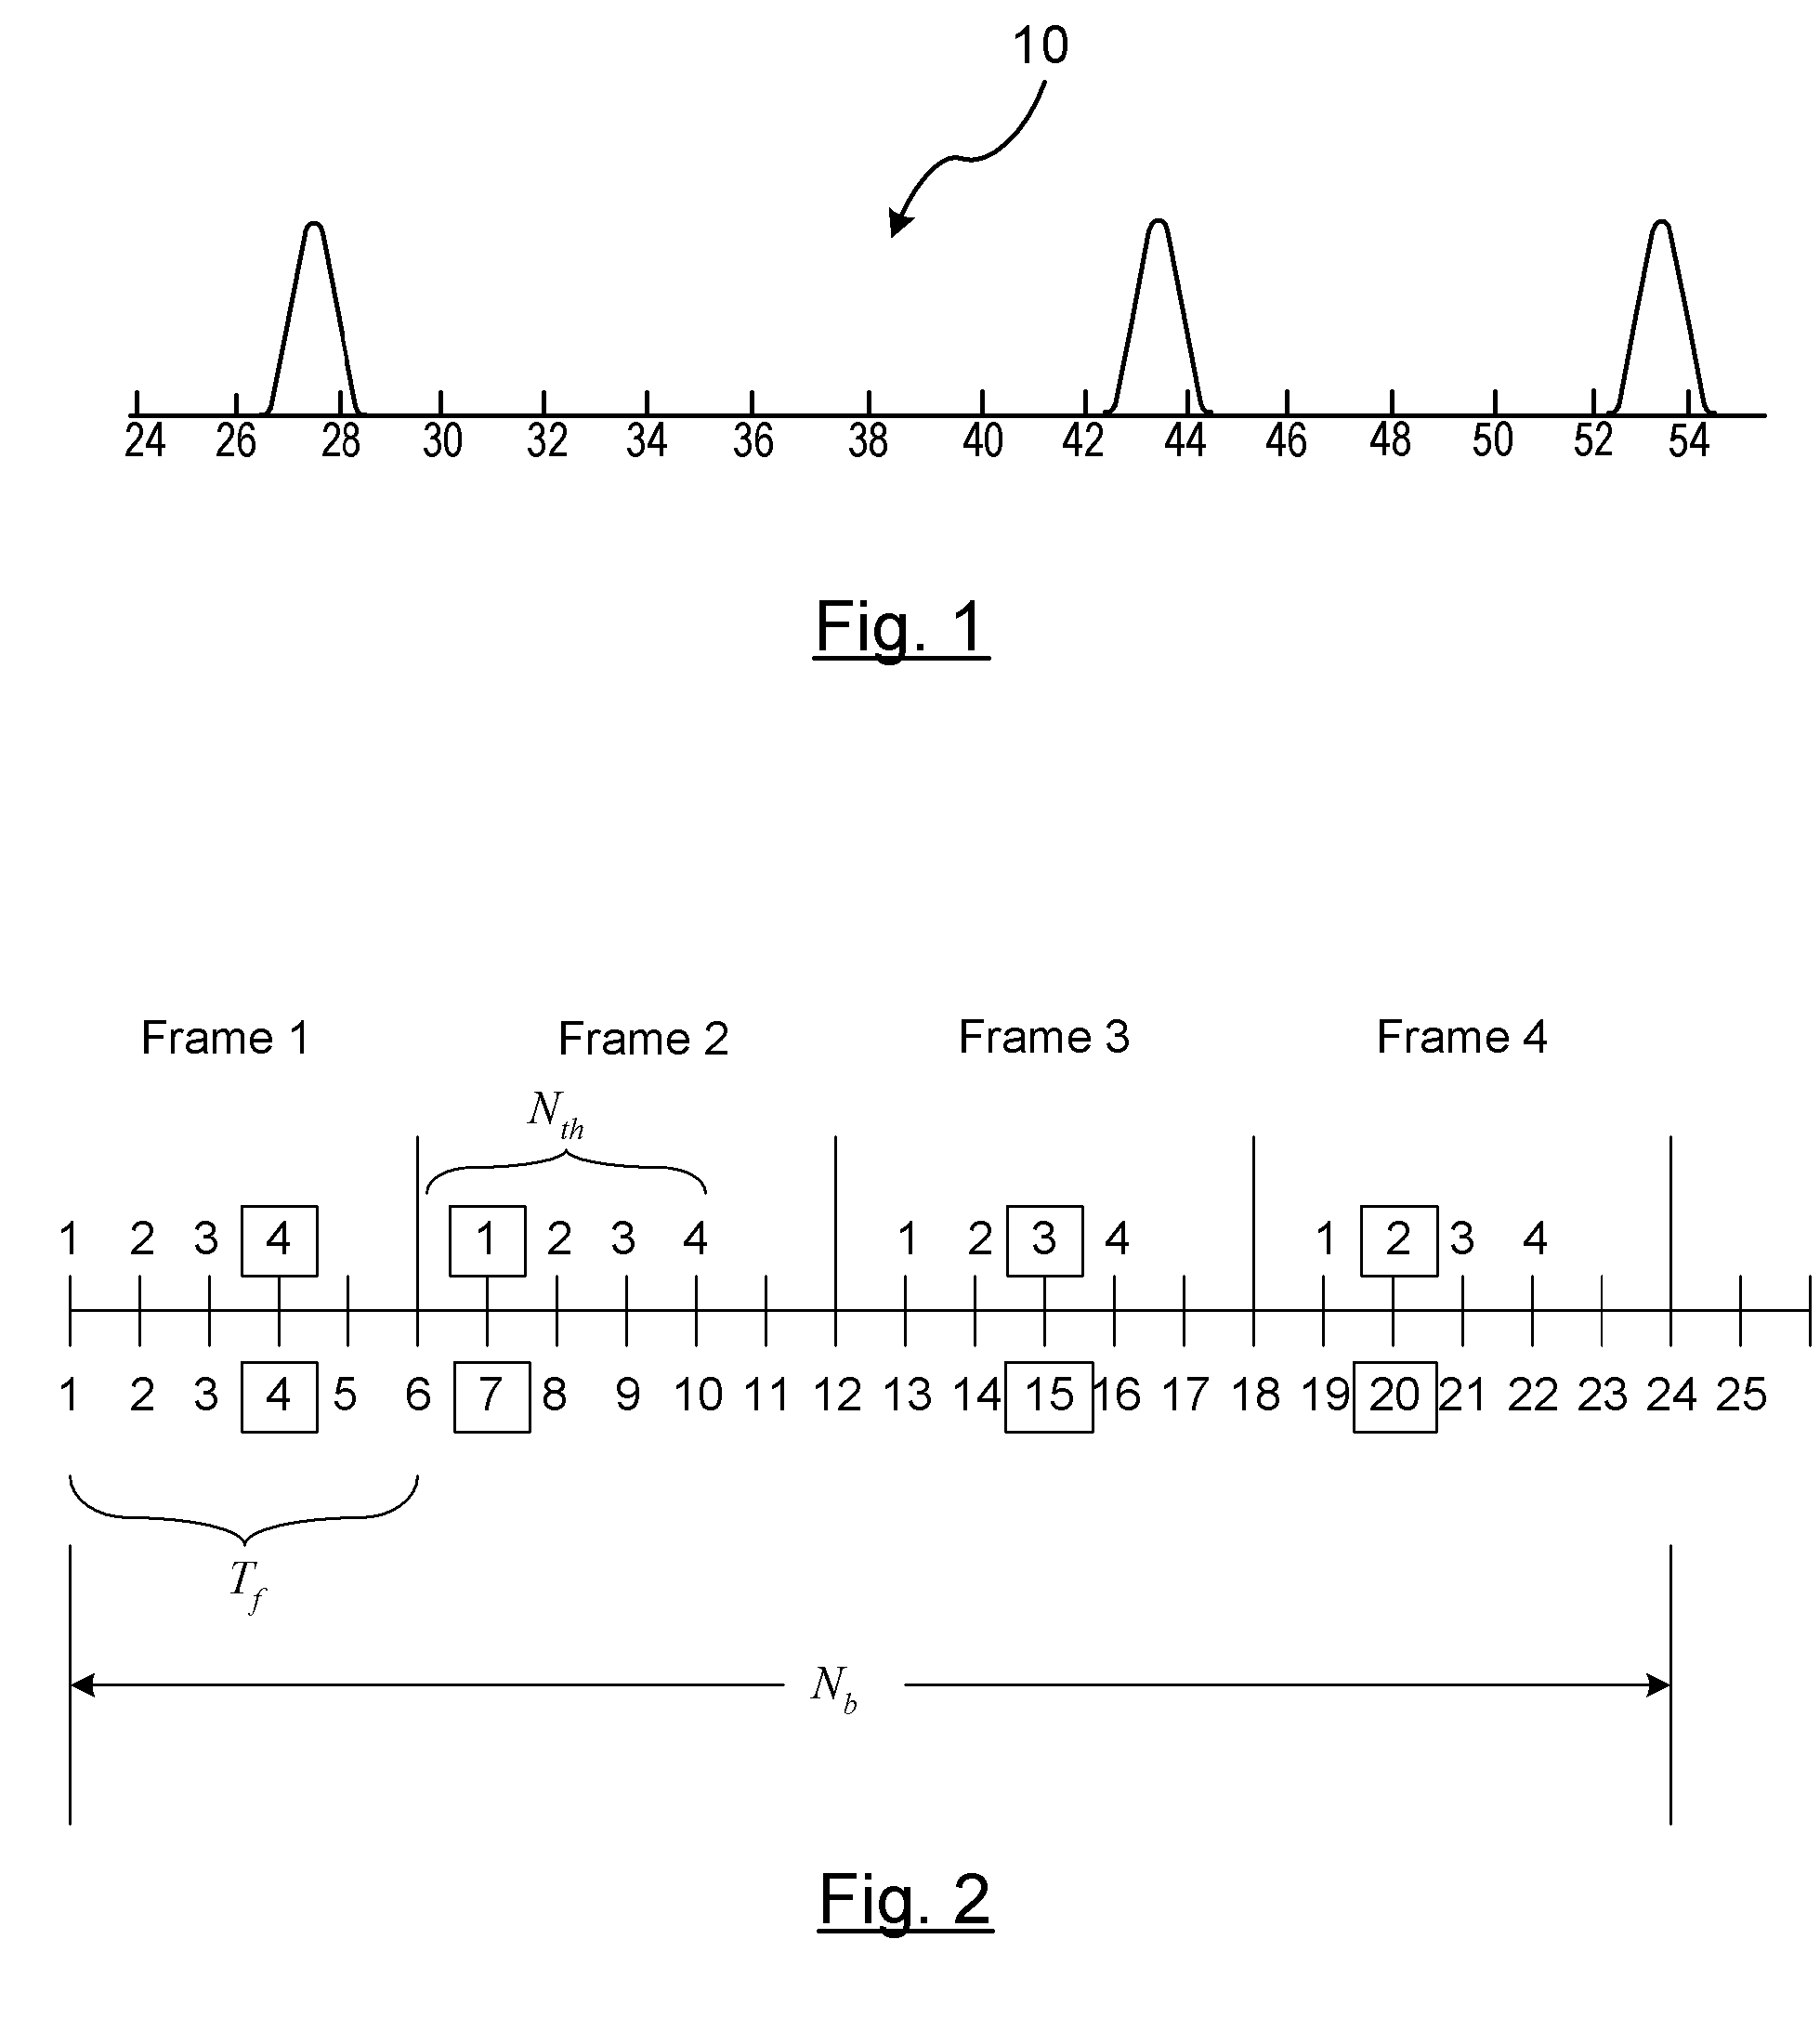 Rapid acquisition method for impulse ultra-wideband signals